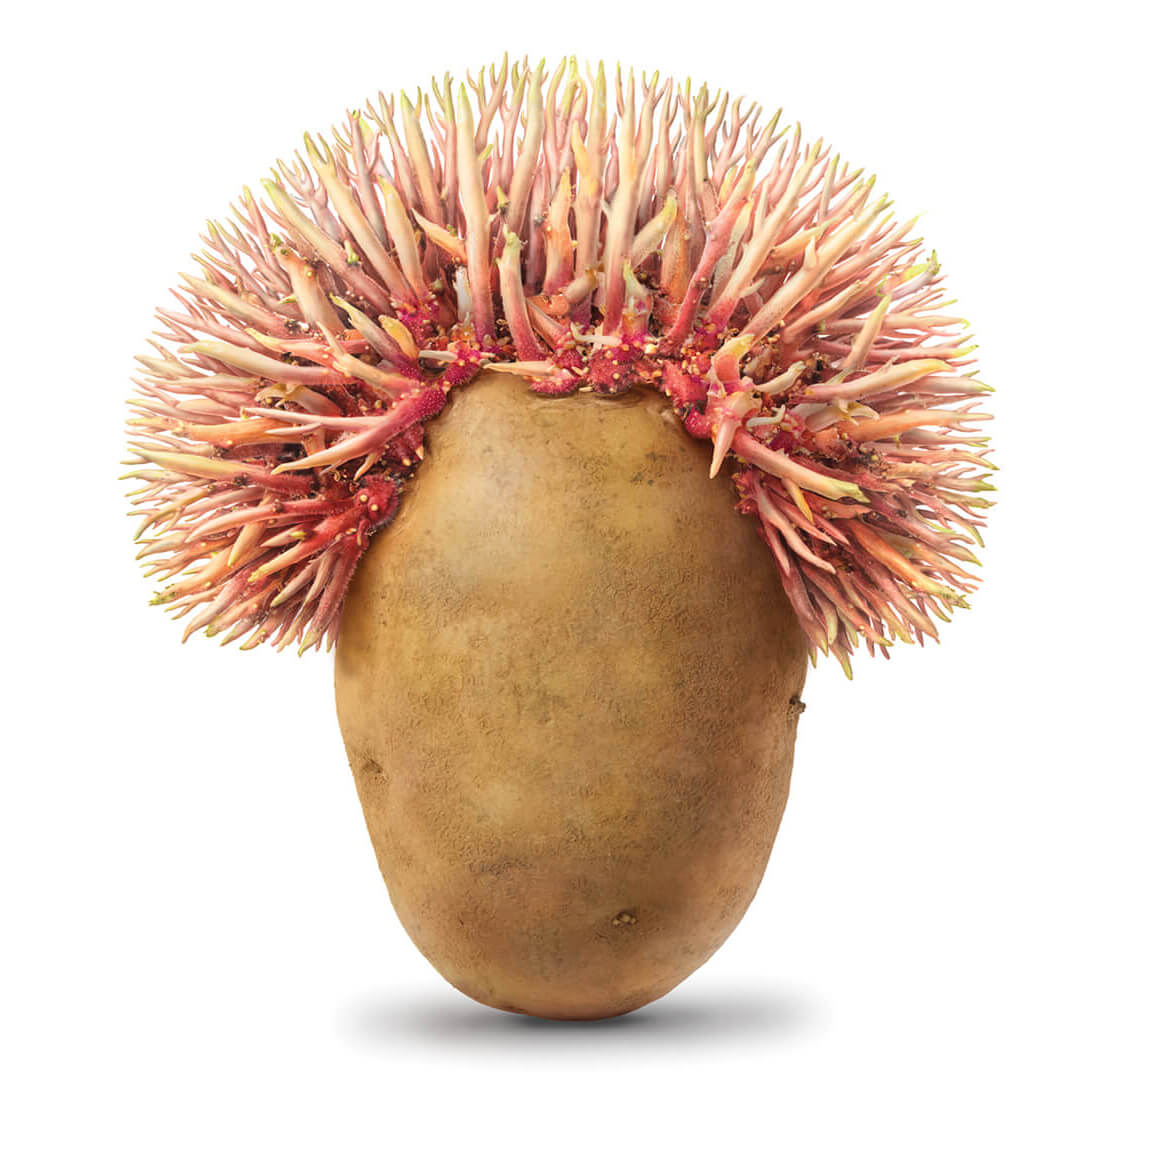 Amvac Smartblock, illustrations of a potato with roots shaped as an afro hairdo